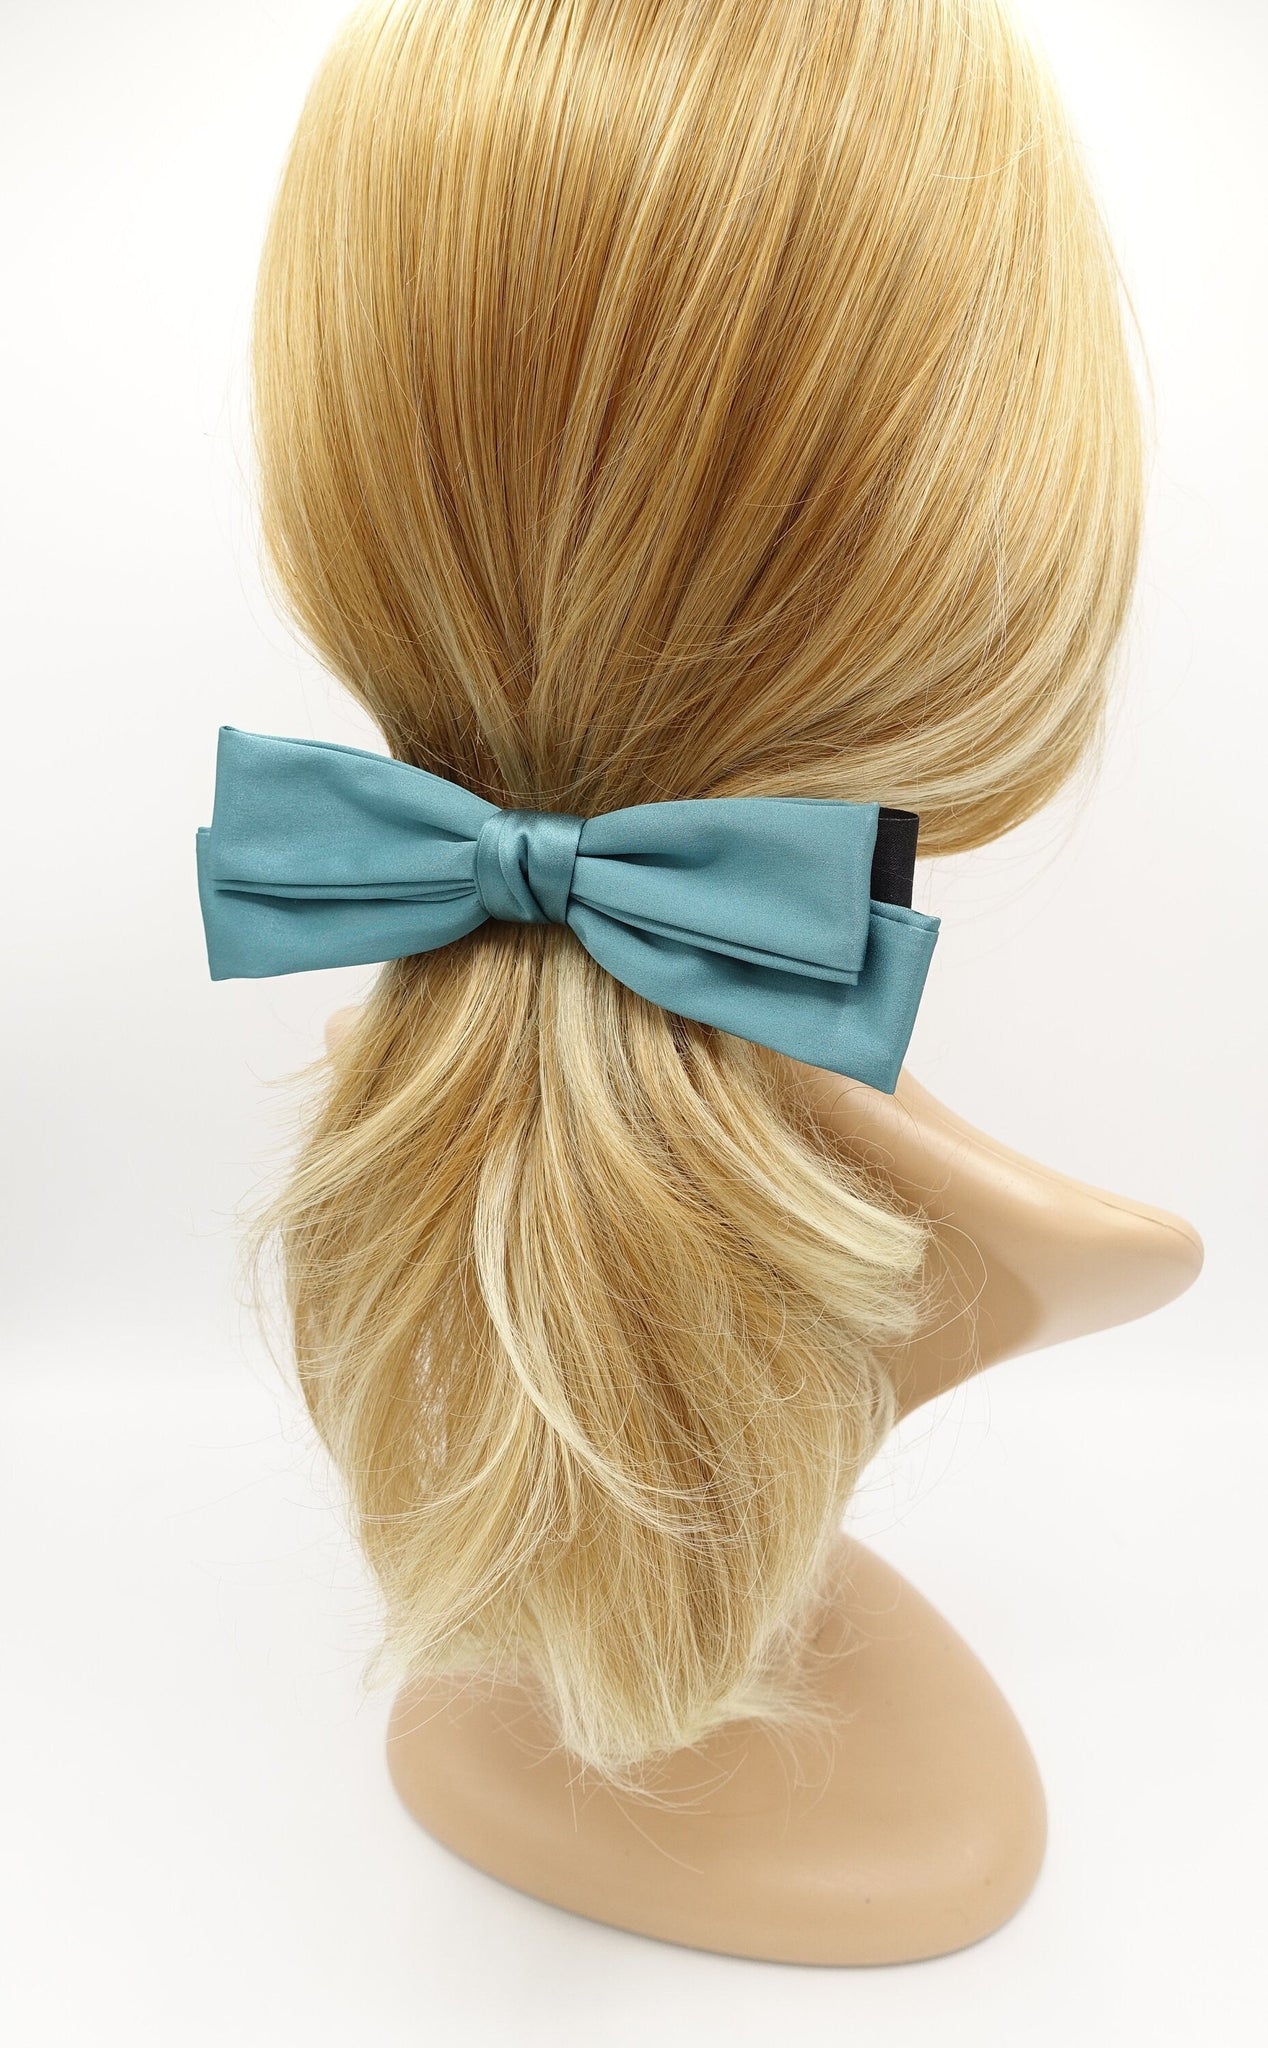 veryshine.com Barrette (Bow) Blue green satin double layered hair bow  triple wing narrow glossy style hair accessory for women